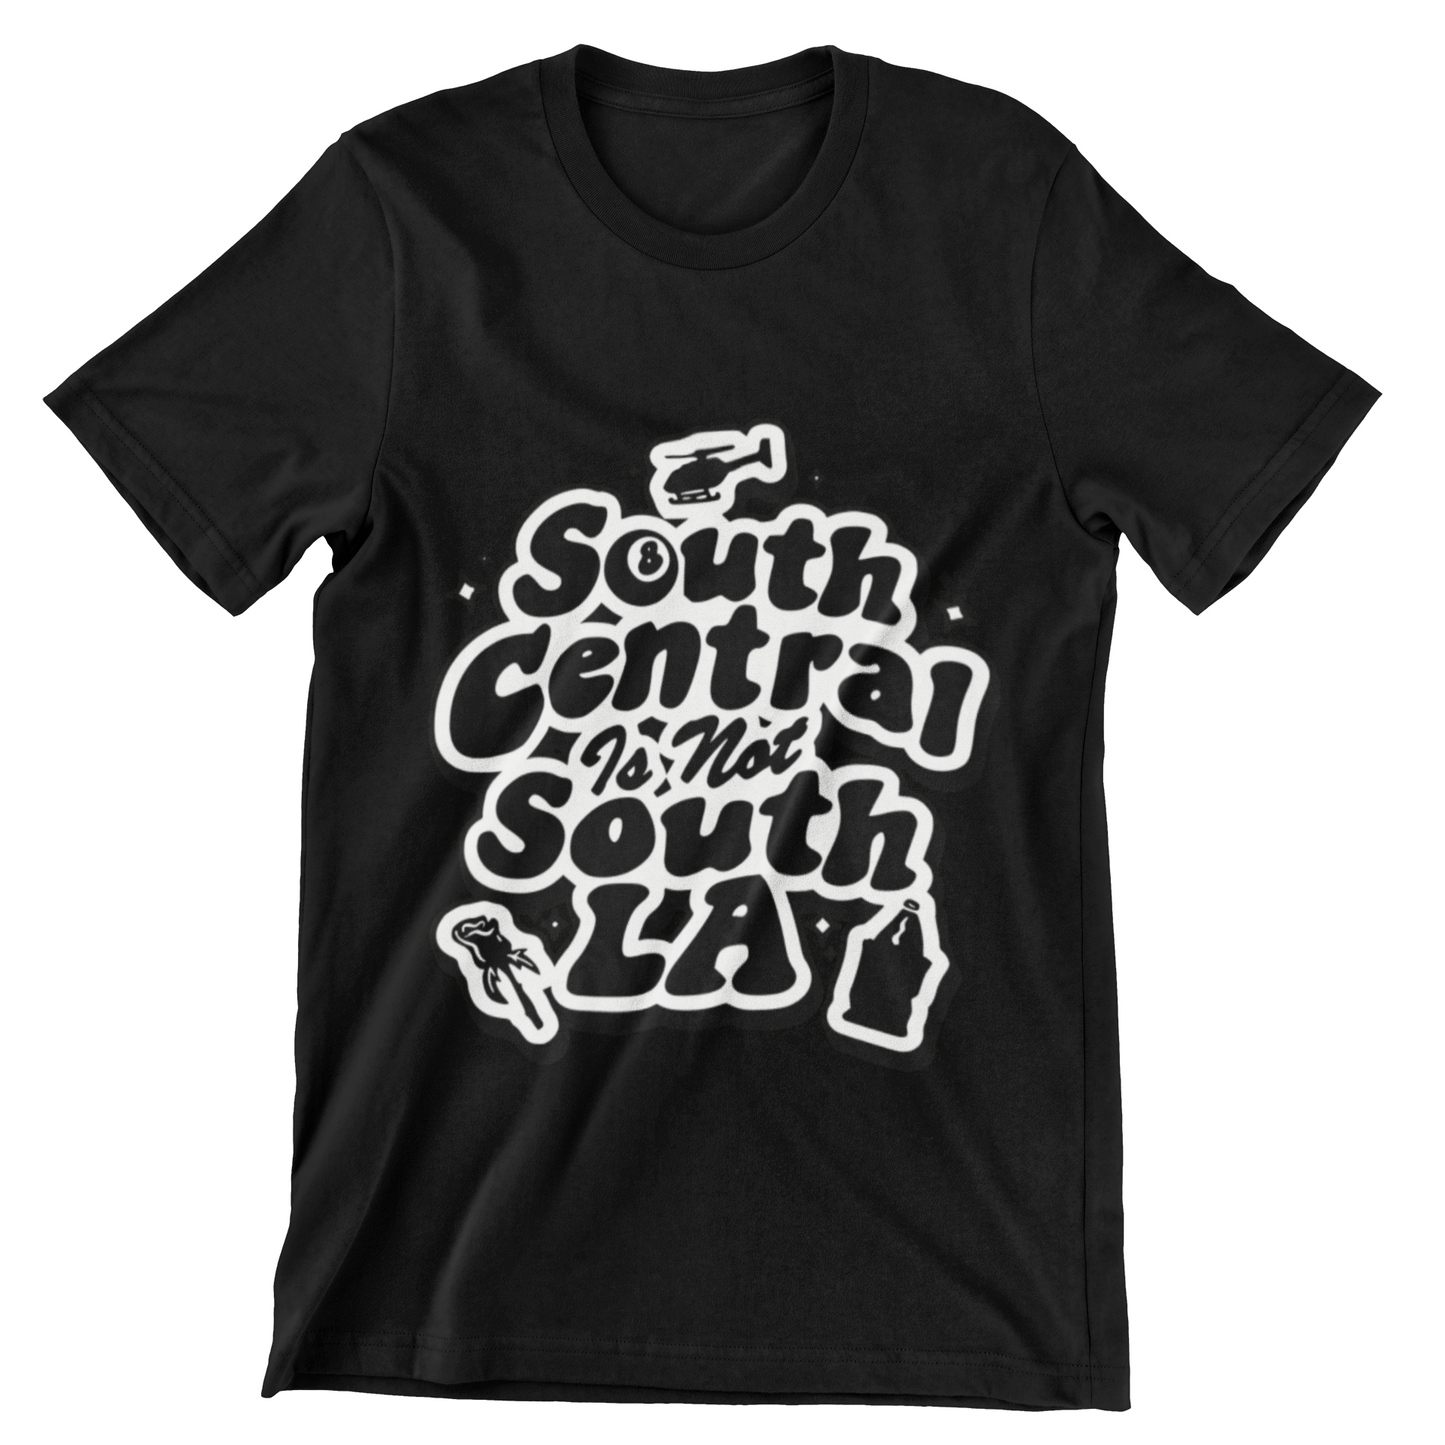 South Central is NOT South L.A